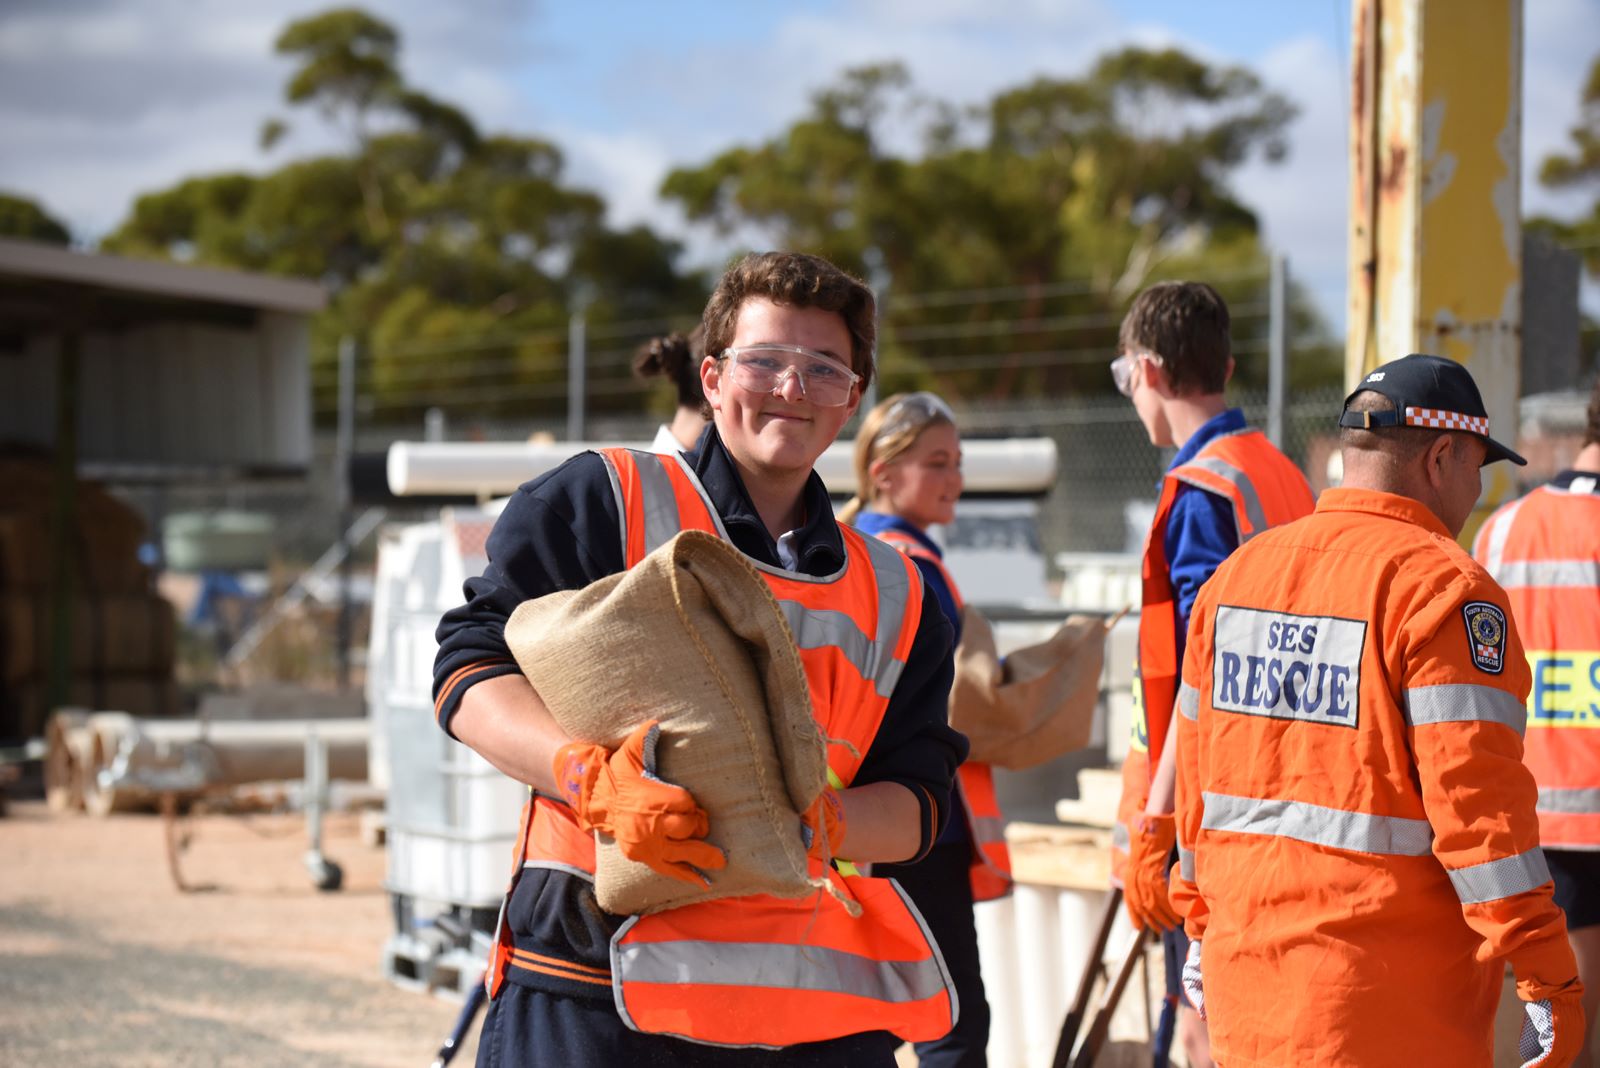 A student volunteer wearing safety glasses and high vis, carrying a sandbag. SES rescue crew members are behind them, they are smiling. 